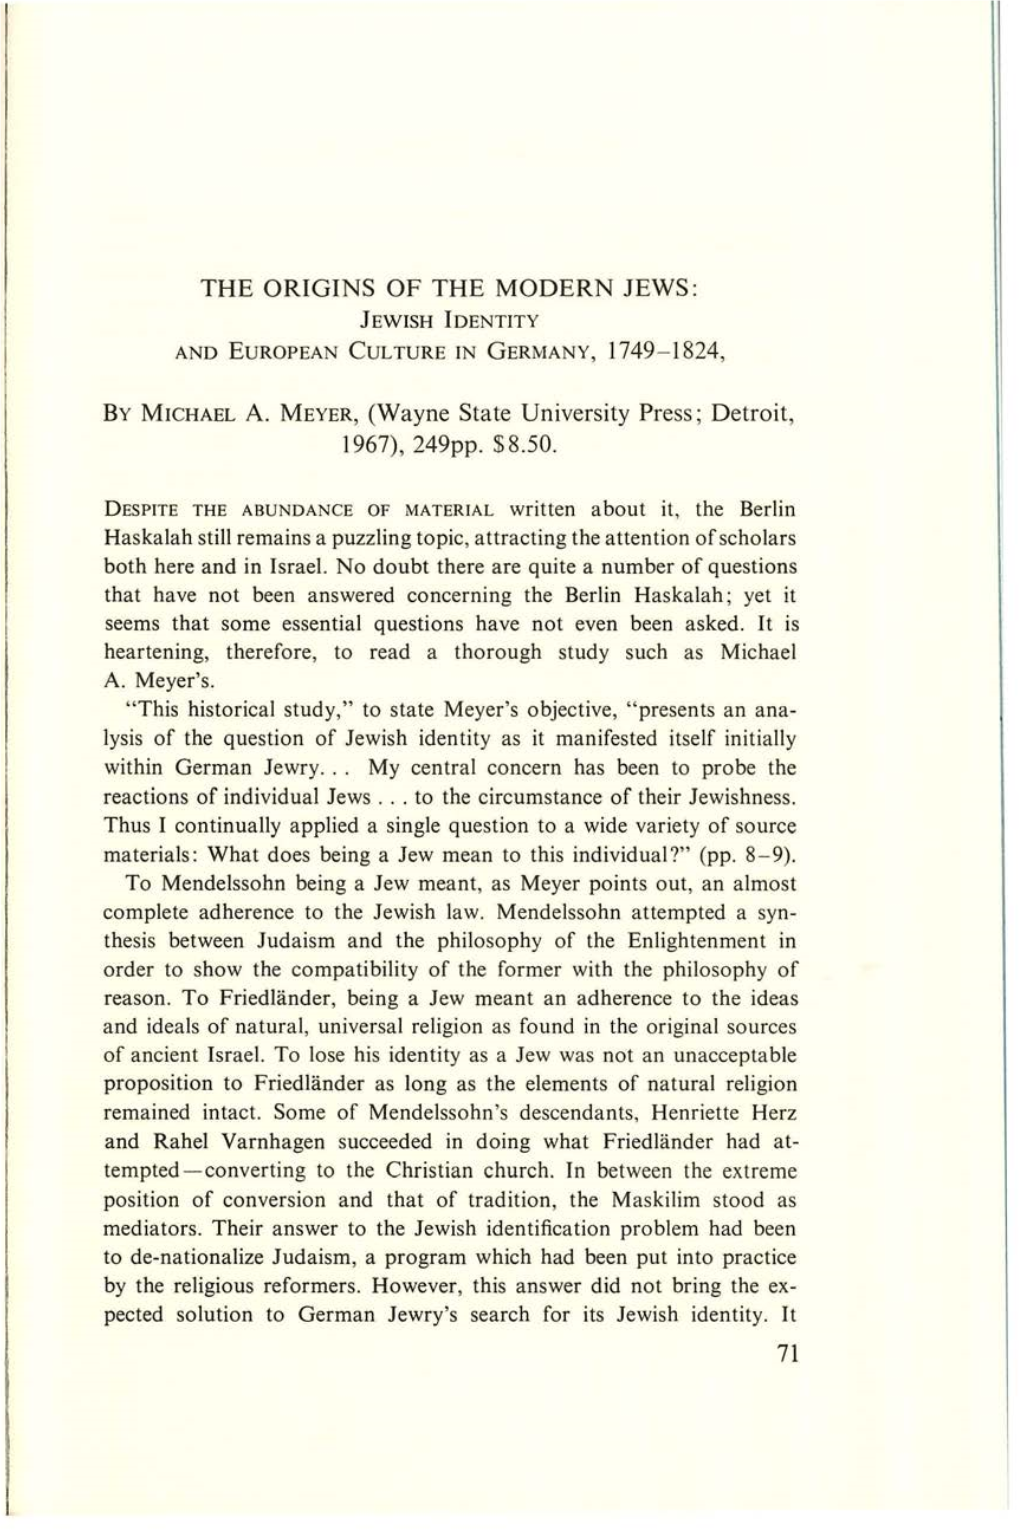 The Origins of the Modern Jews: by Michael A. Meyer